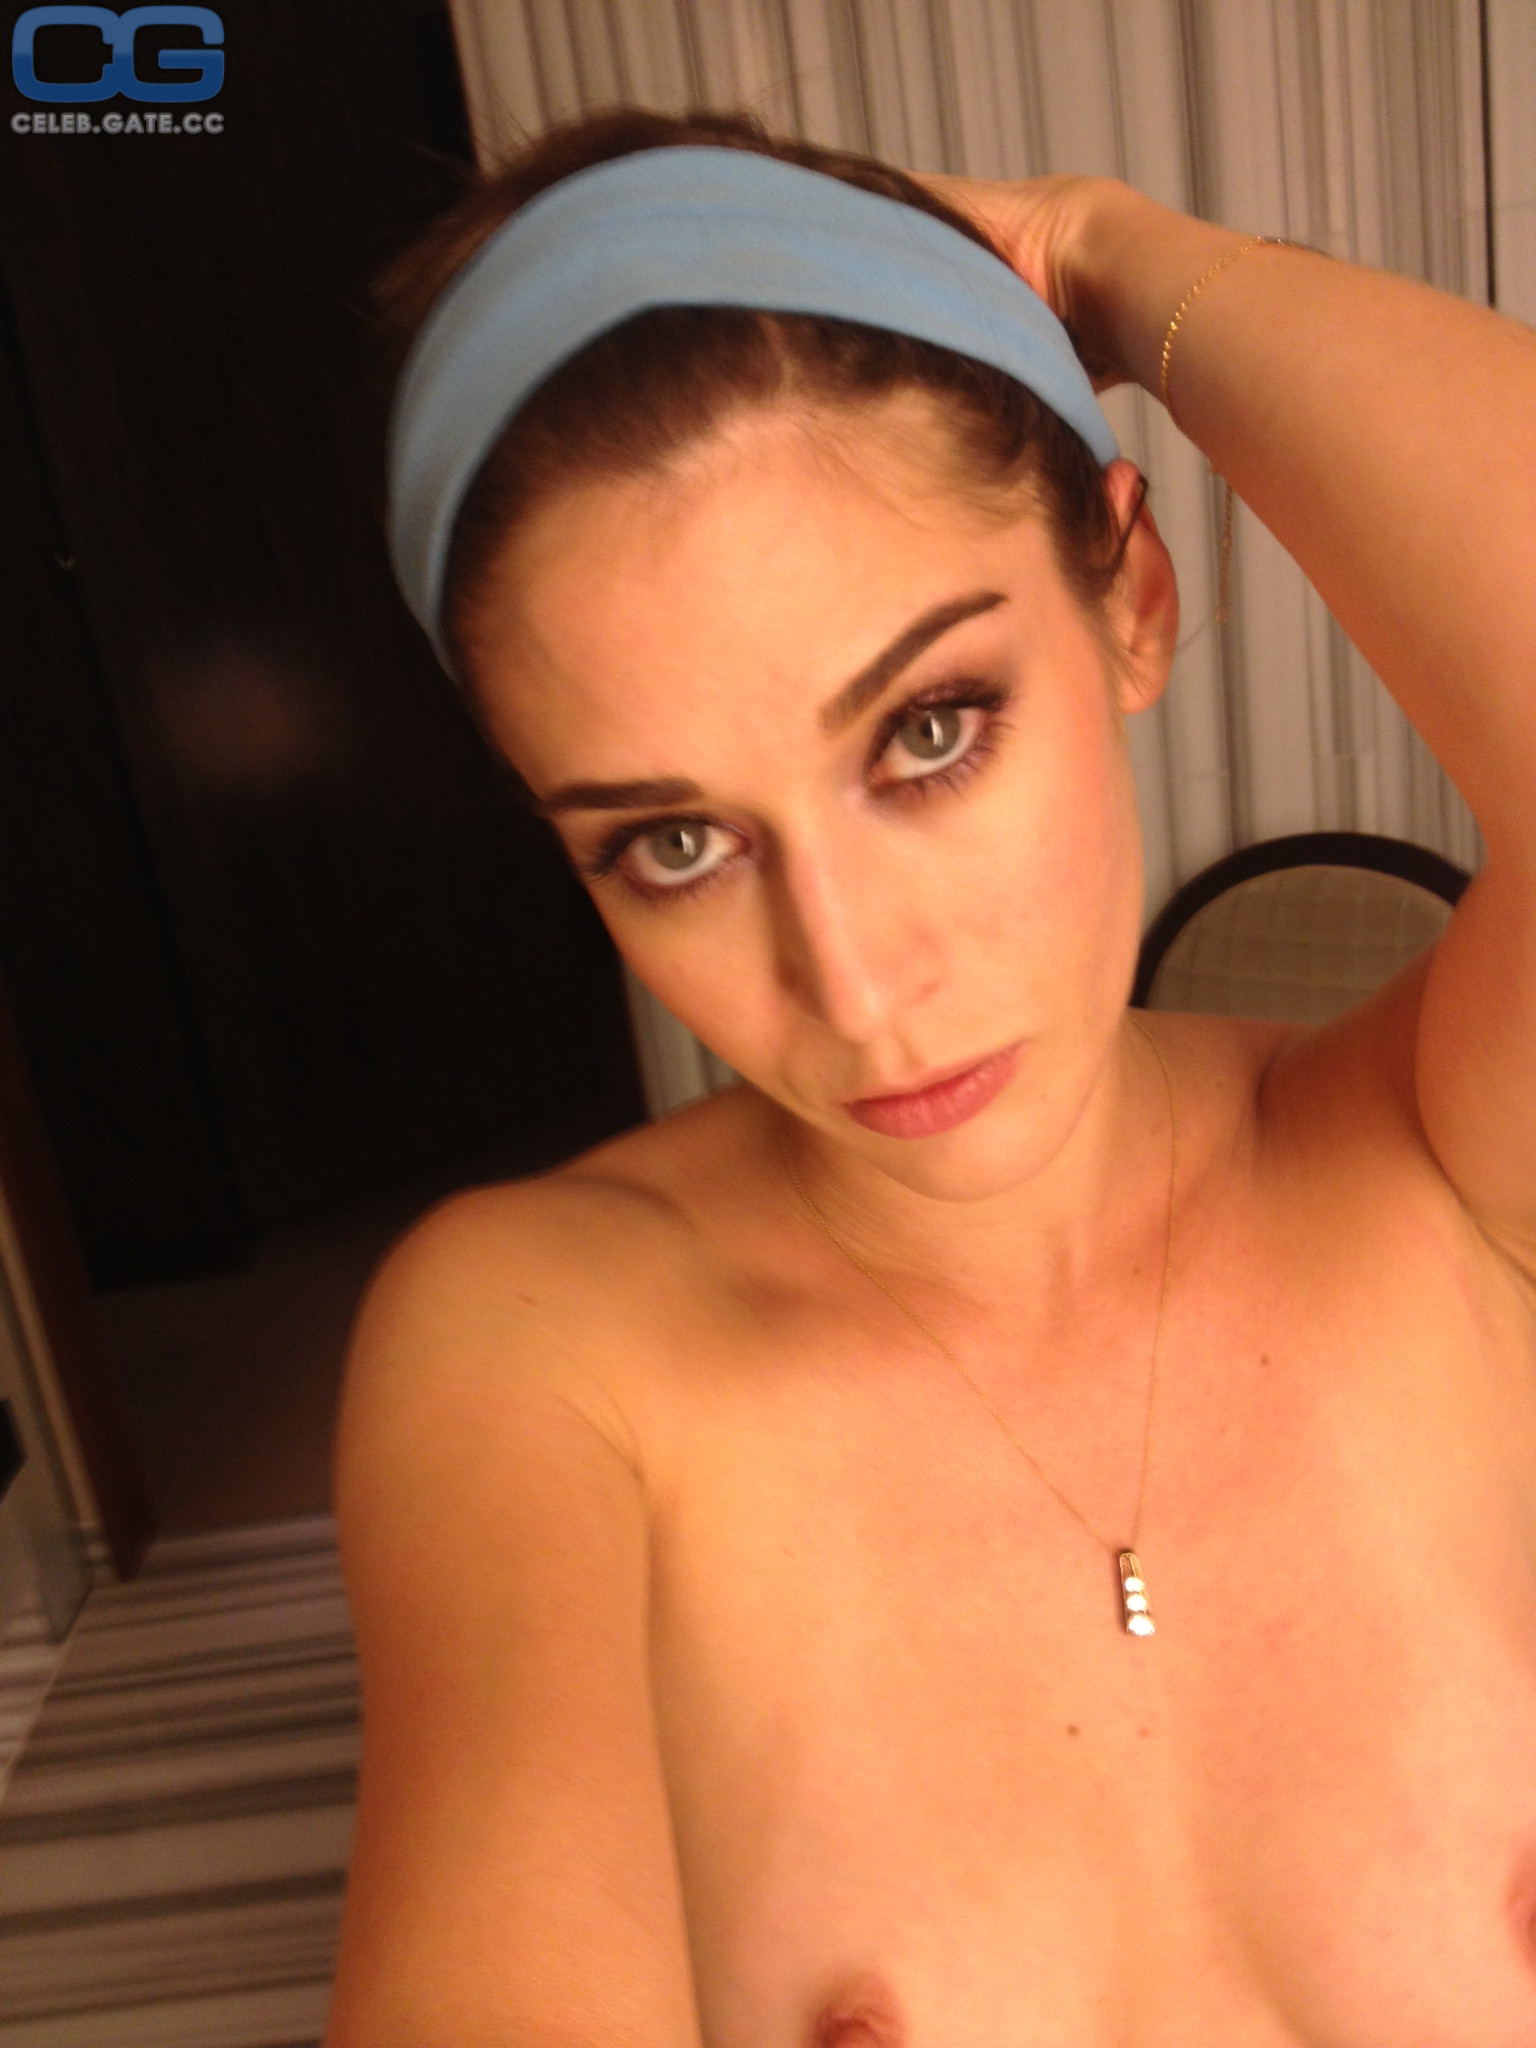 biju lall aryachalil recommends lizzy caplan nude pic pic